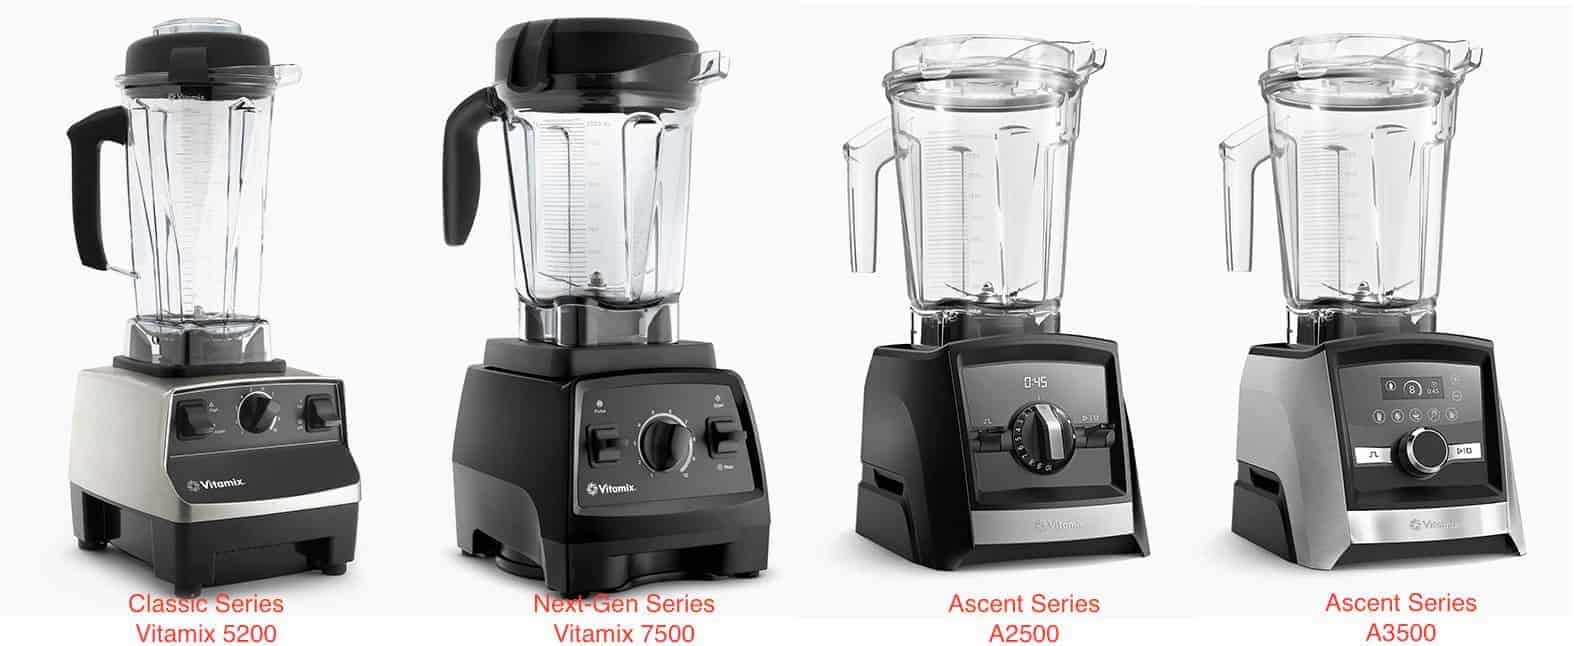 https://www.blenderreviews.us/wp-content/uploads/which-vitamix-to-buy-3-comp.jpg